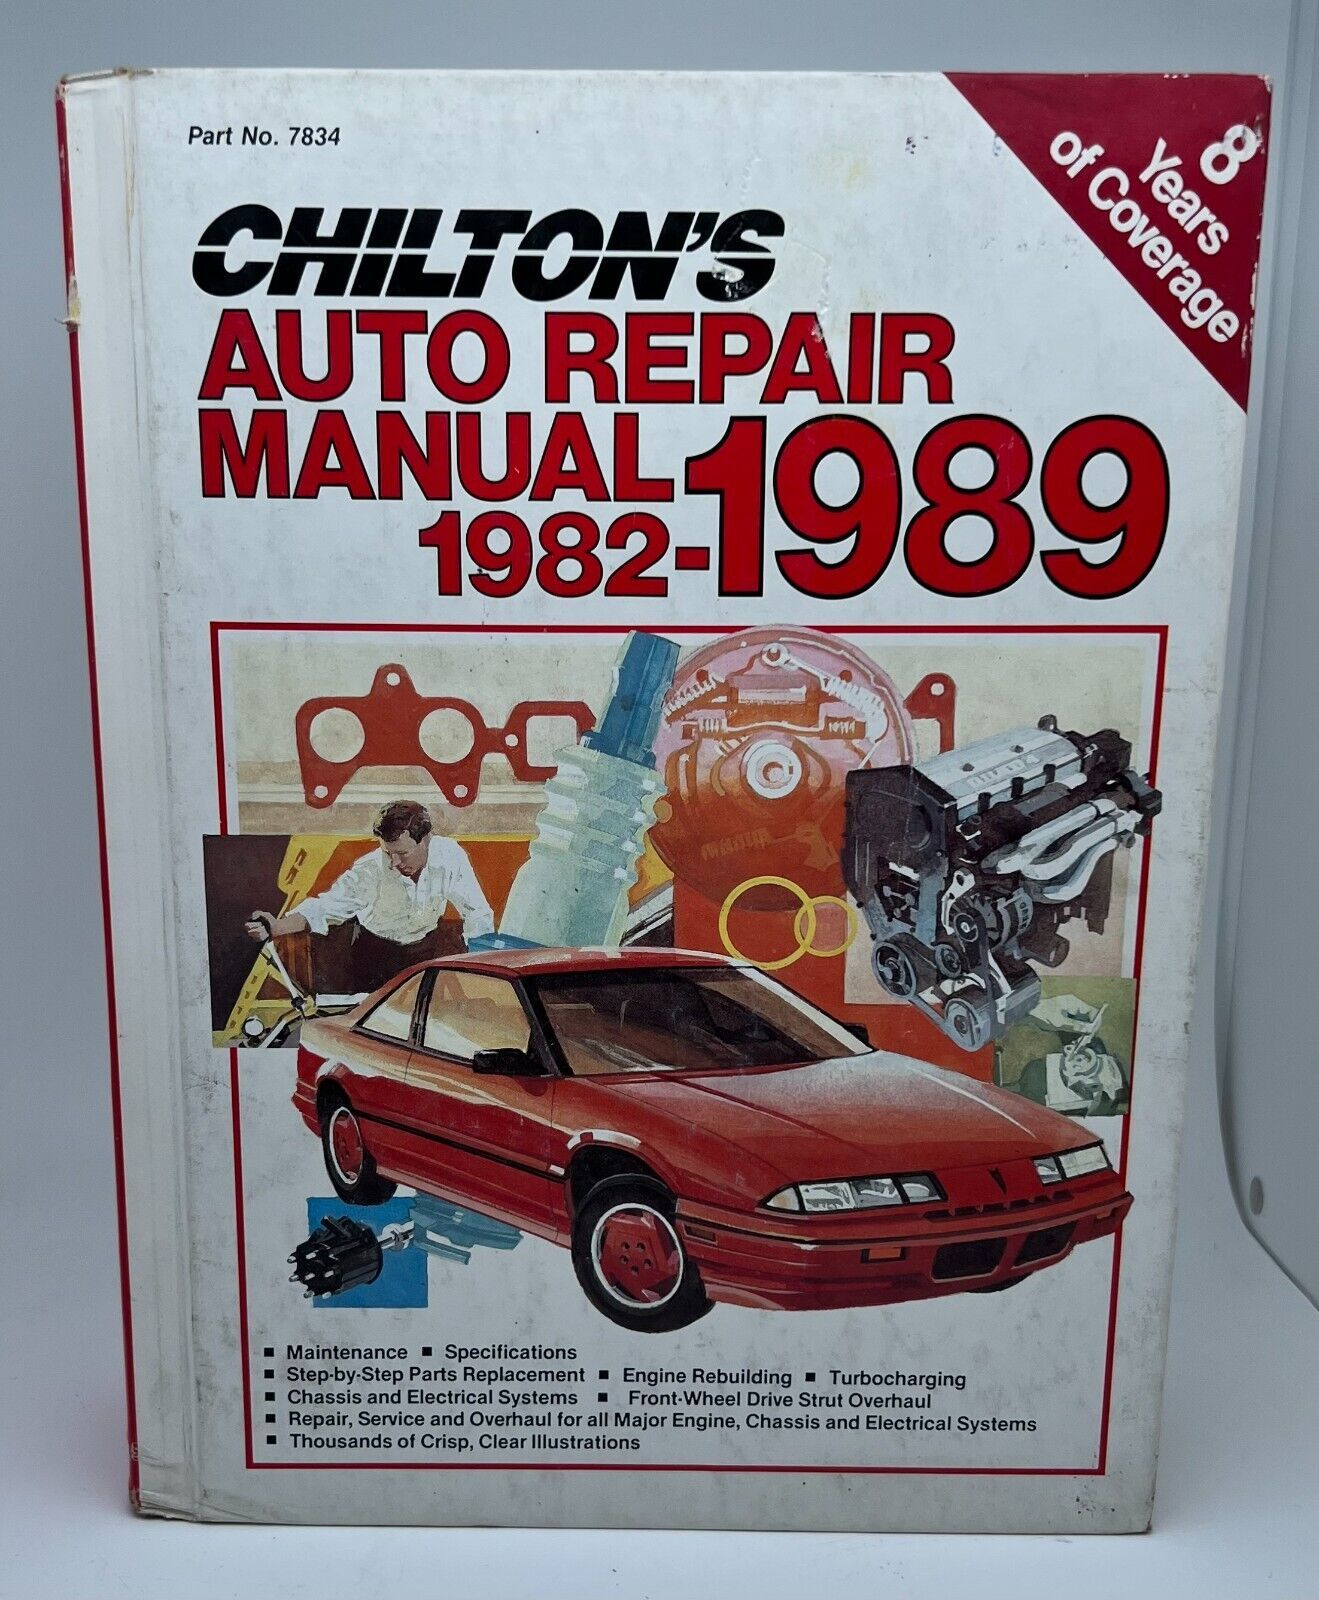 Primary image for Chilton's Auto Repair Manual 1982-1989 Part No. 7834 VERY NICE COND.